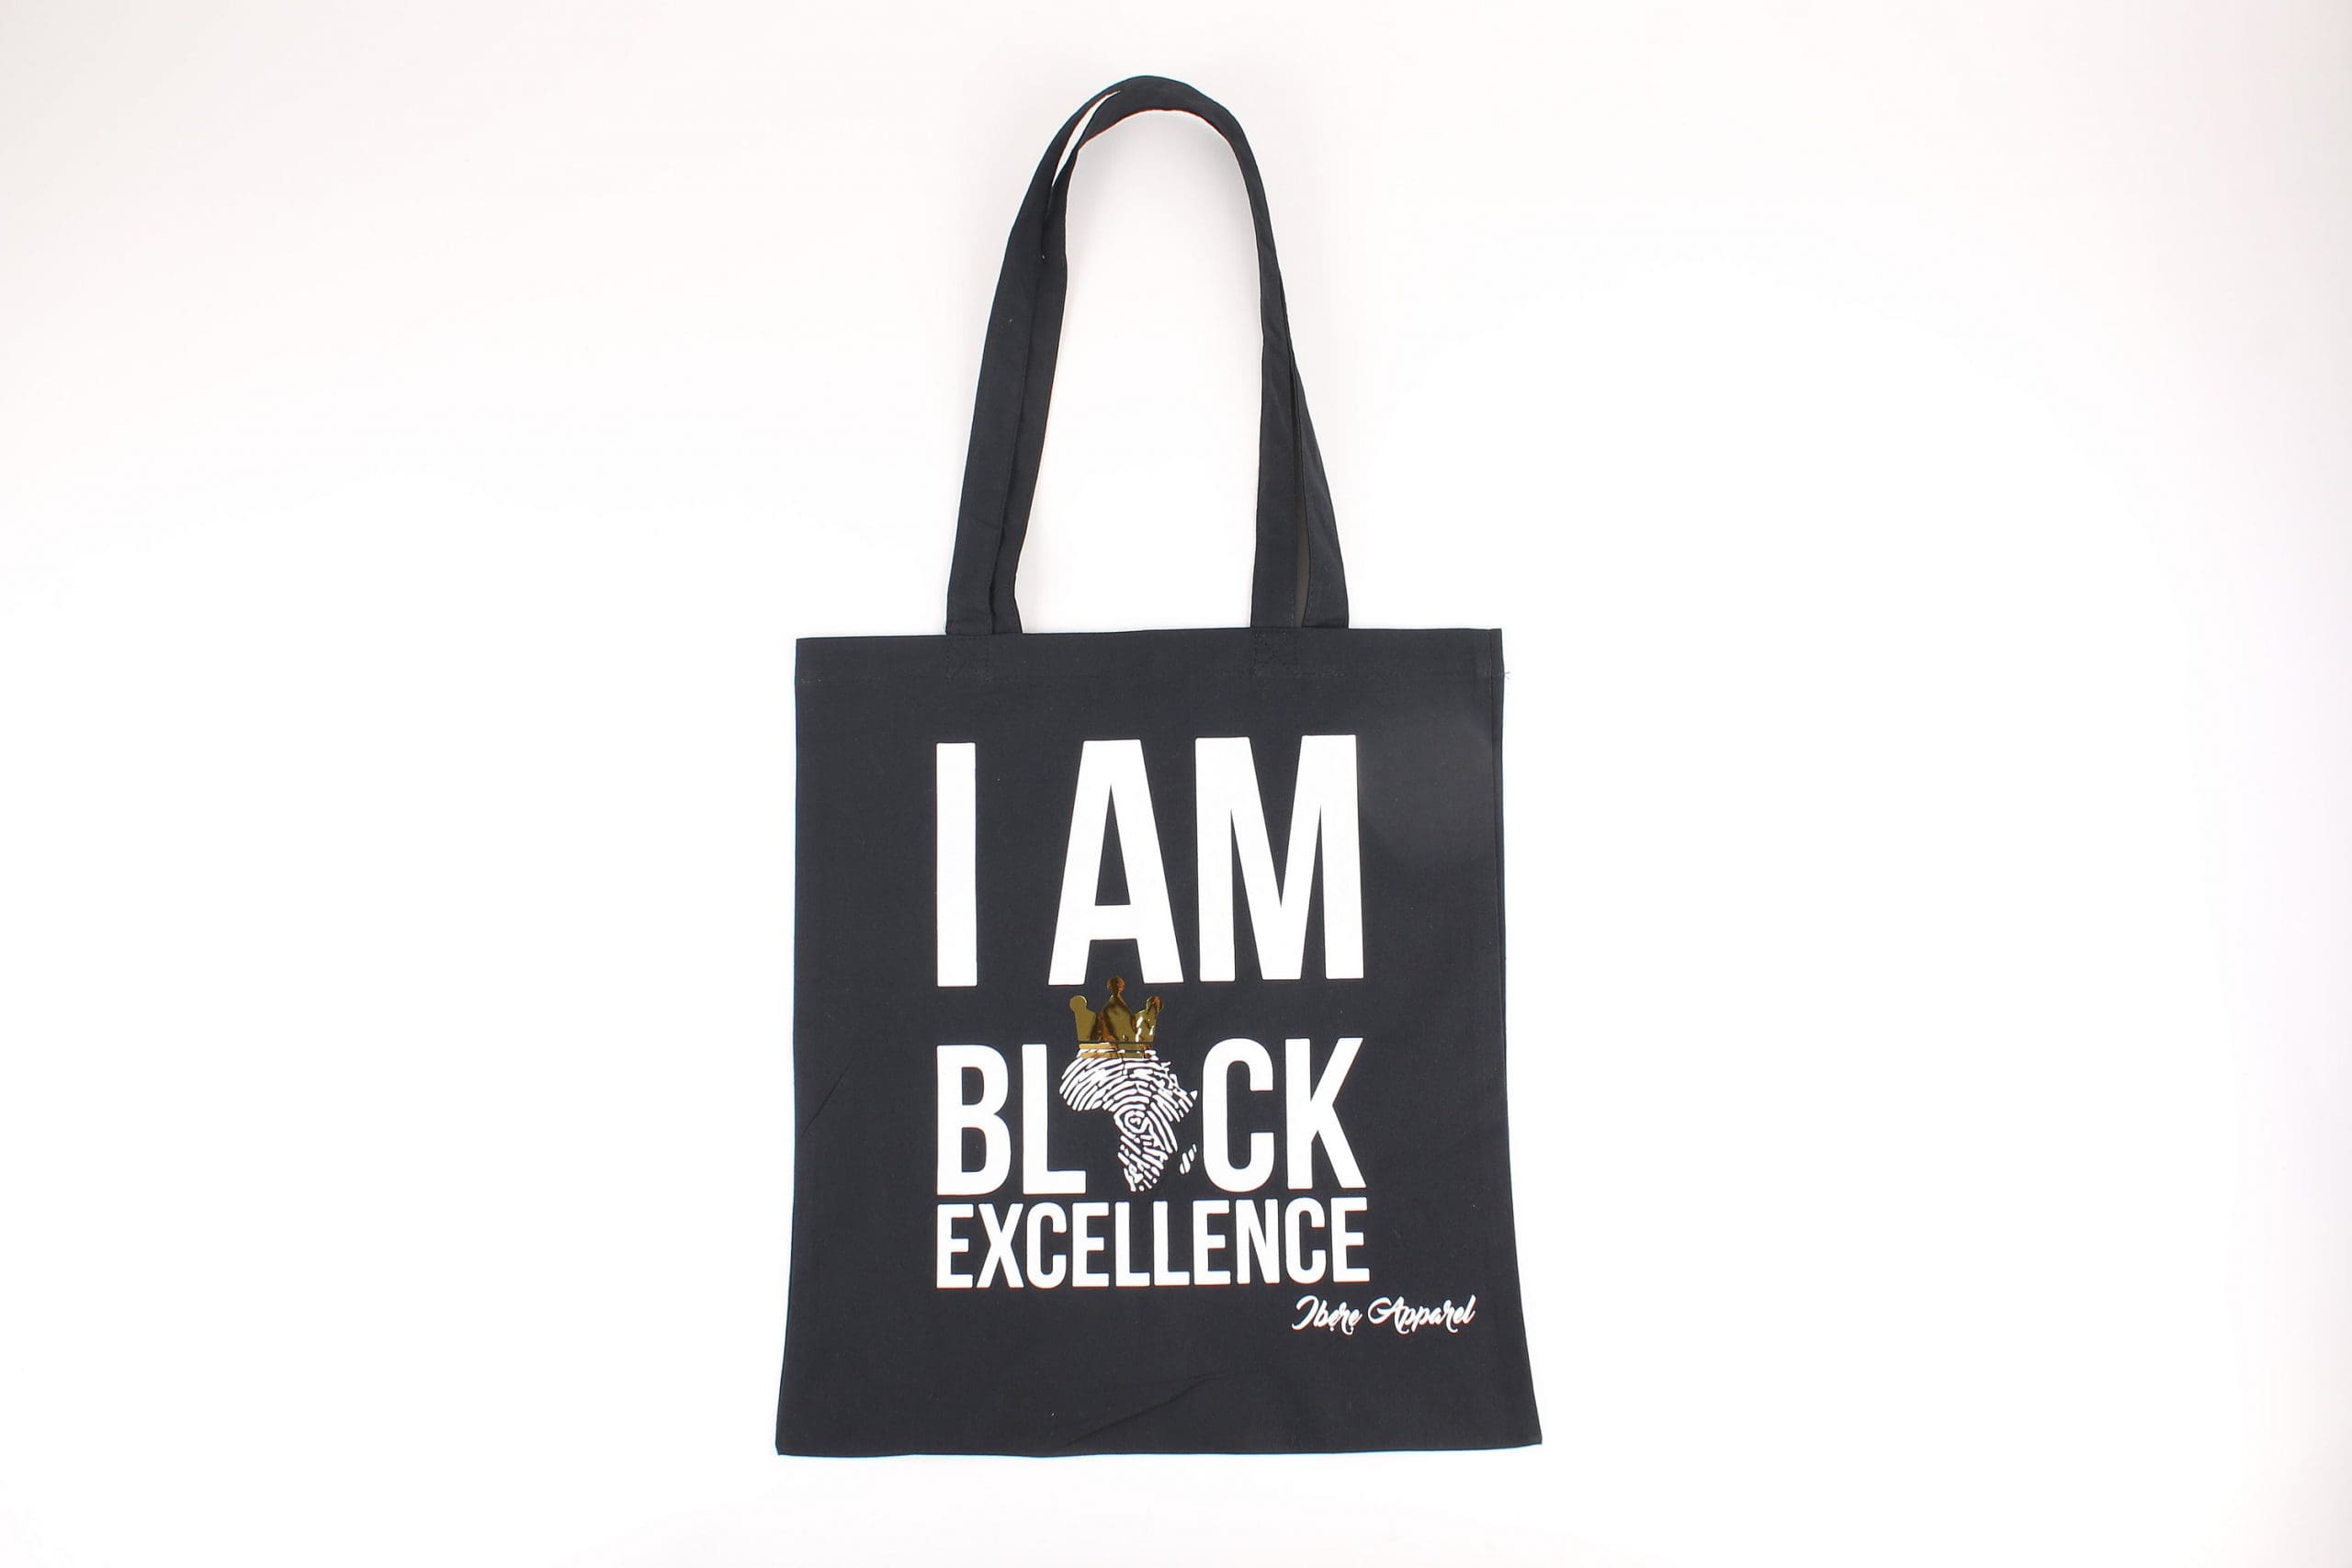 Black Excellence Bag, wakuda, african print fans, black-owned brands, black pound day